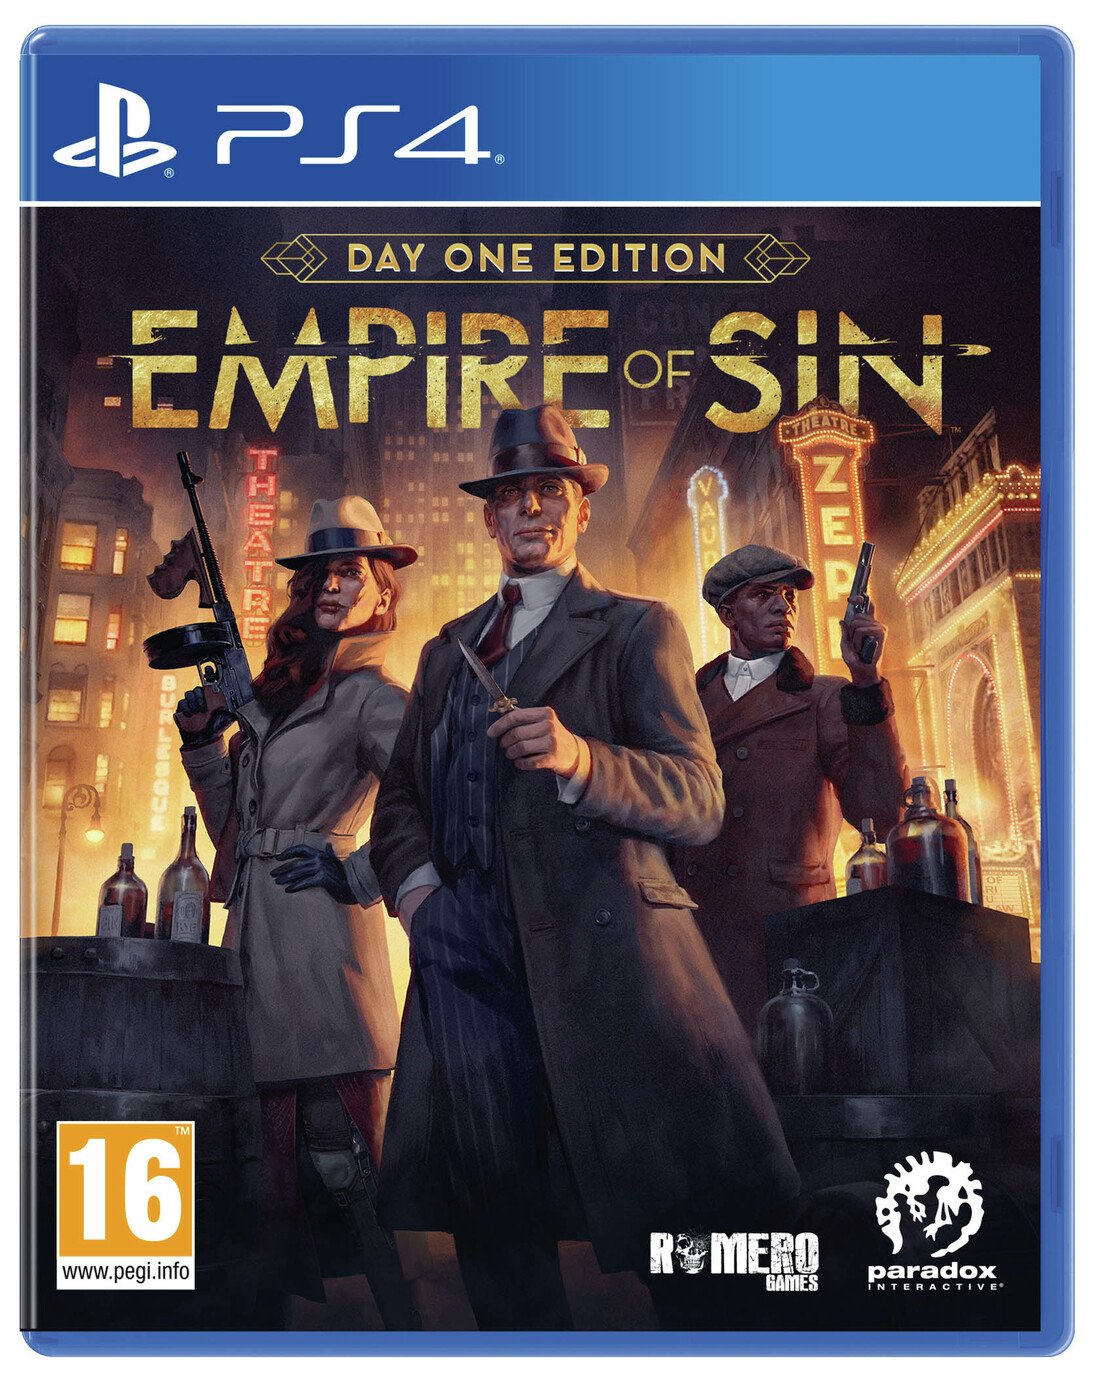 Empire of Sin PS4 Game Pre-Order Review